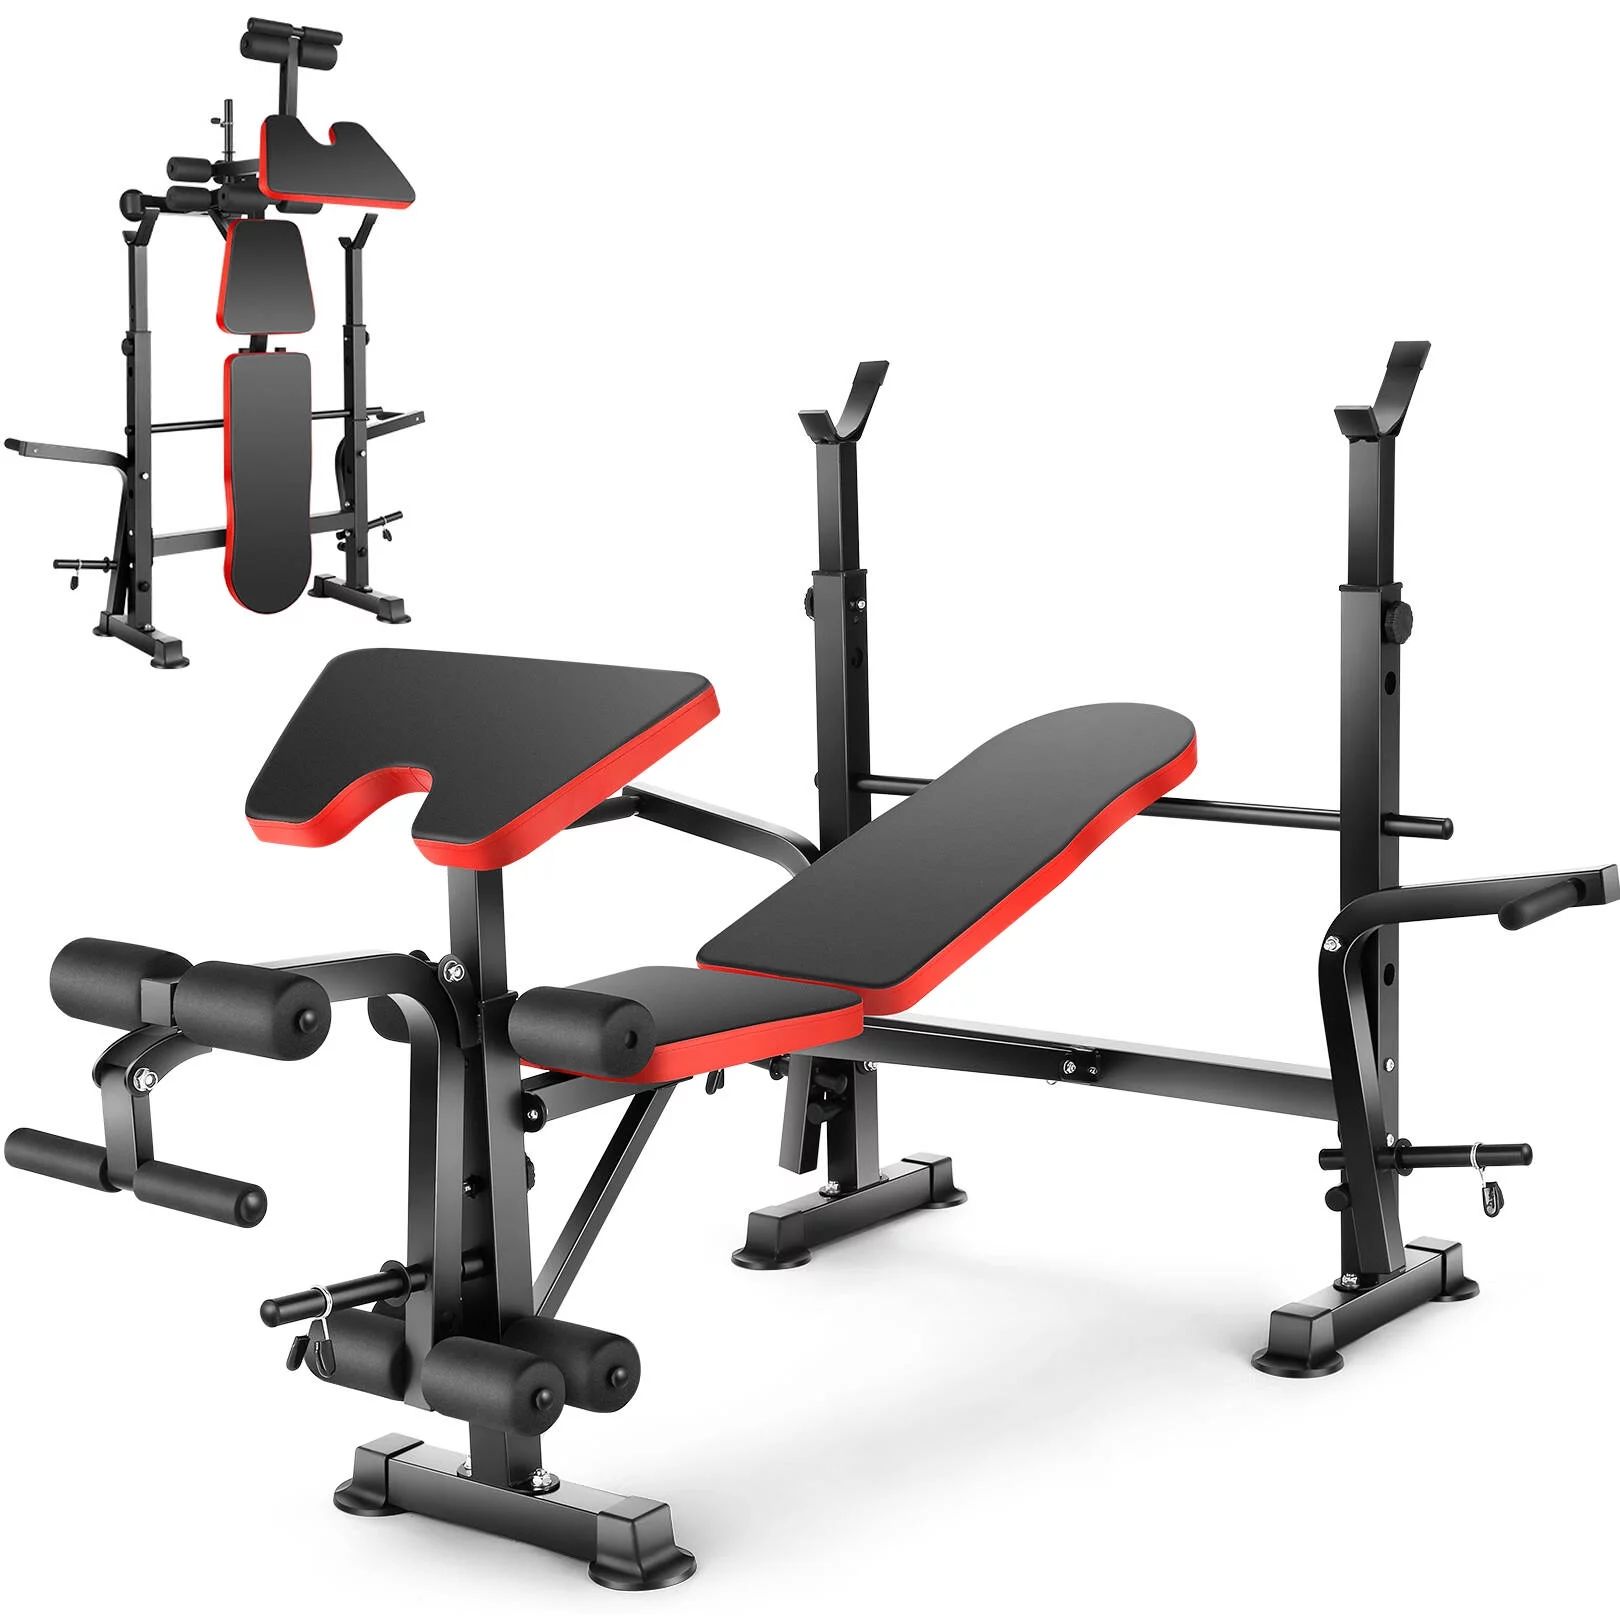 VIBESPARK Adjustable Weight Bench 600lbs 6-in-1 Foldable Workout Bench Set with Barbell Rack & Le... | Walmart (US)